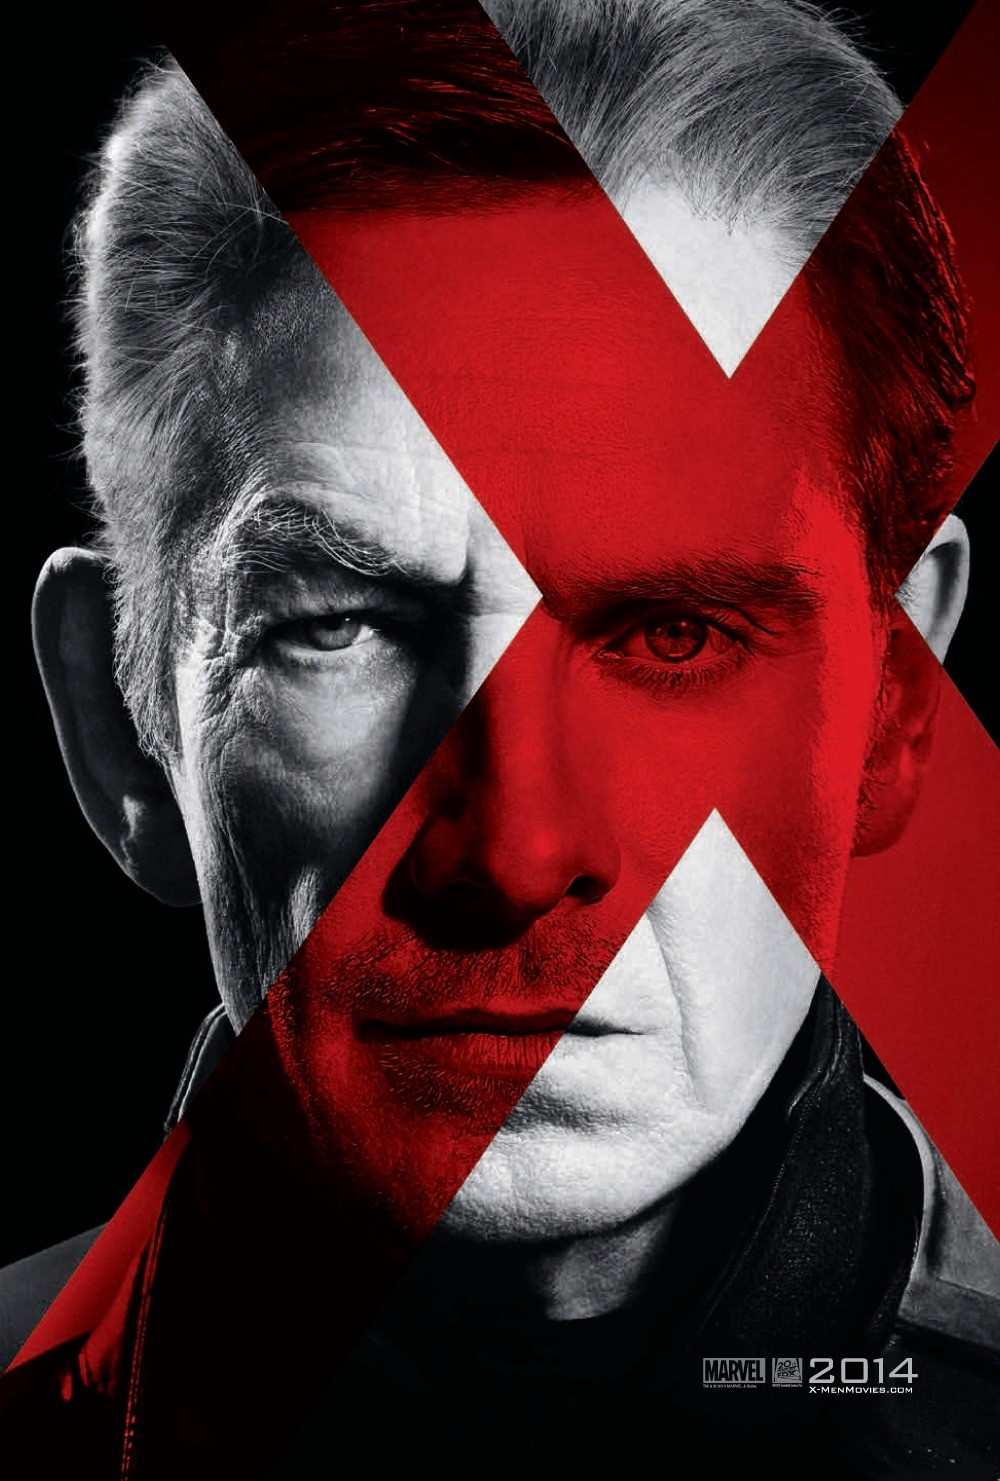 Extra Large Movie Poster Image for X-Men: Days of Future Past (#4 of 17)